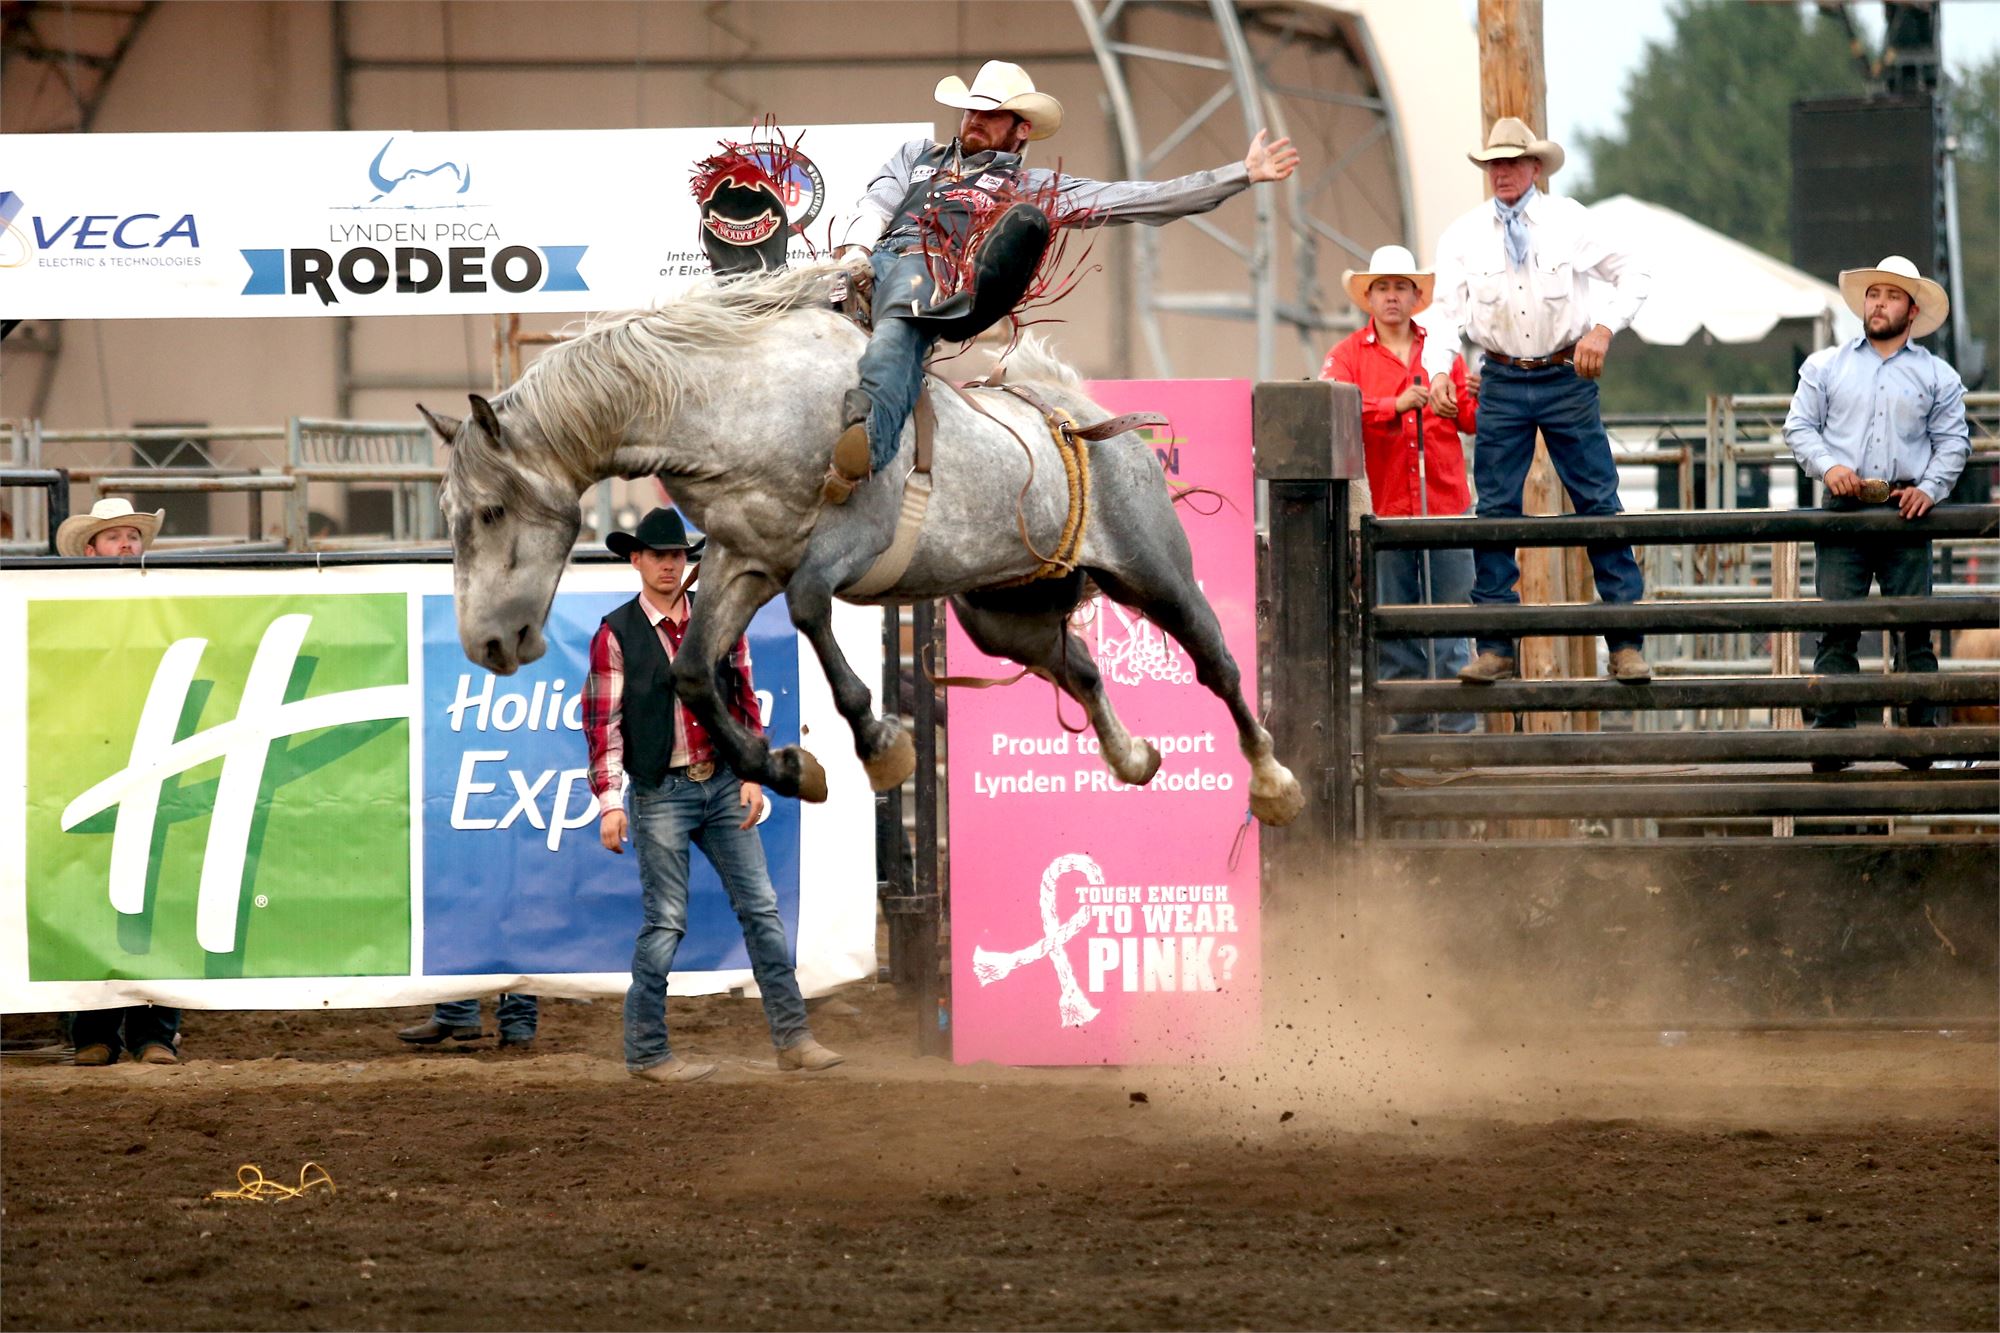 Lynden PRCA Rodeo